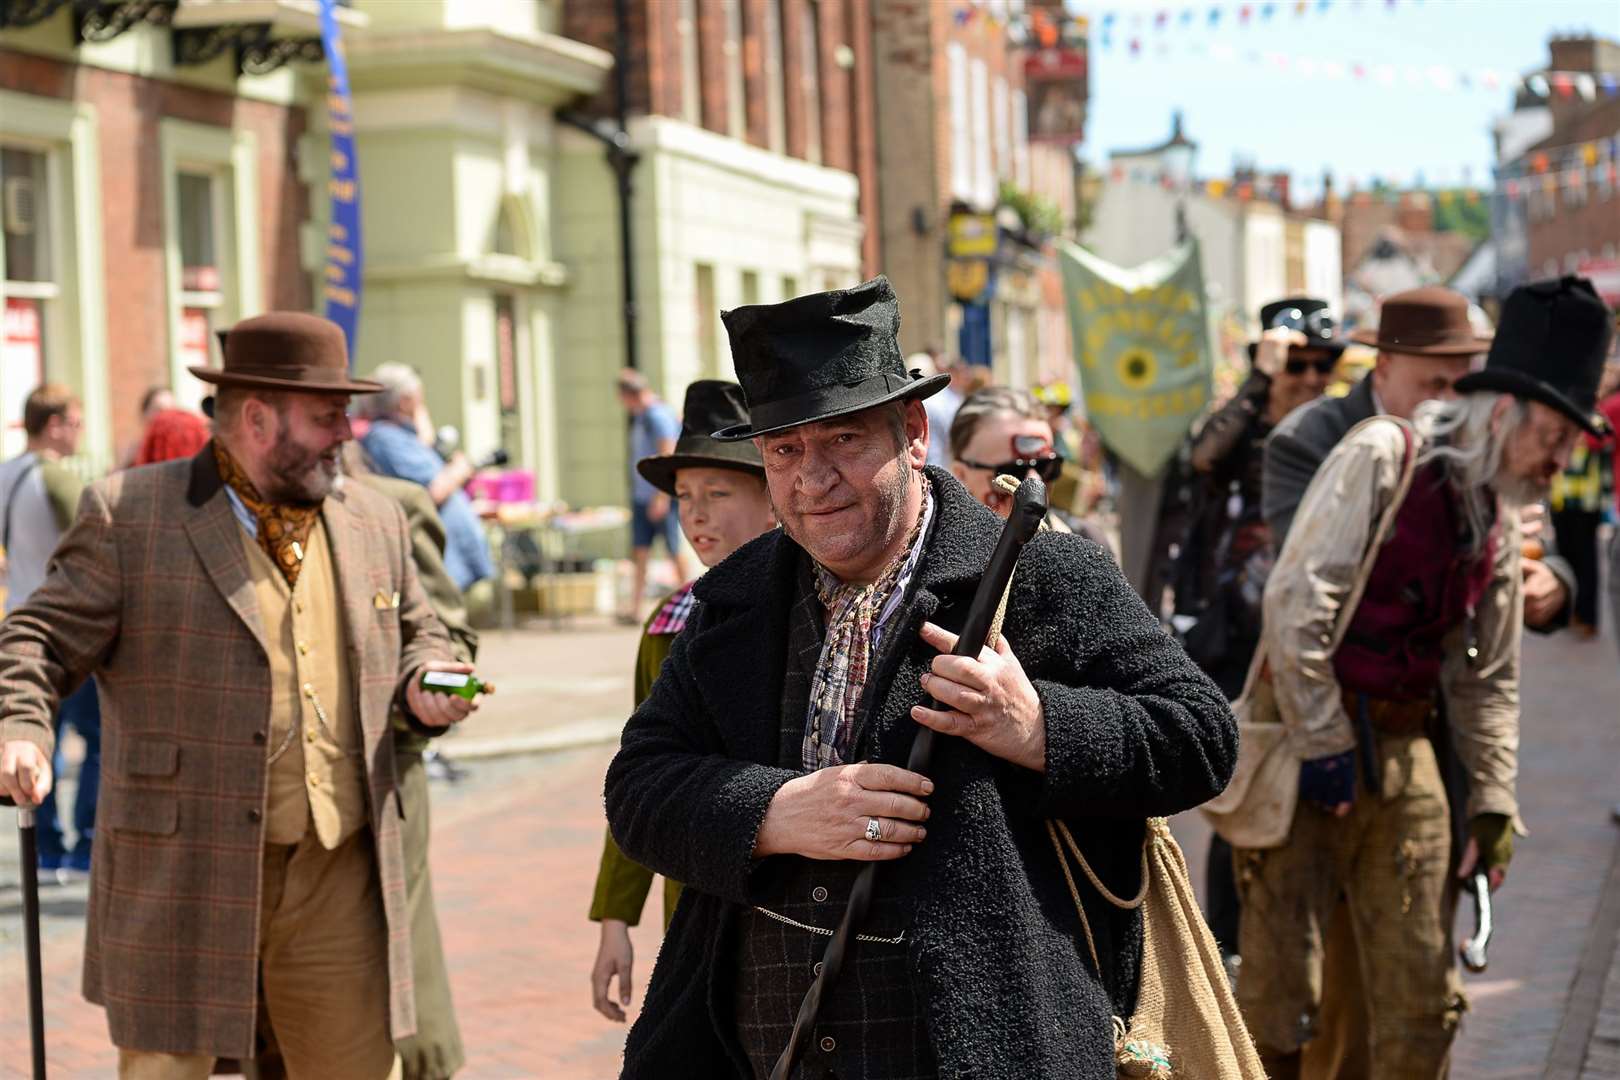 Parade through Rochester town centre for the Dickens Festival last year